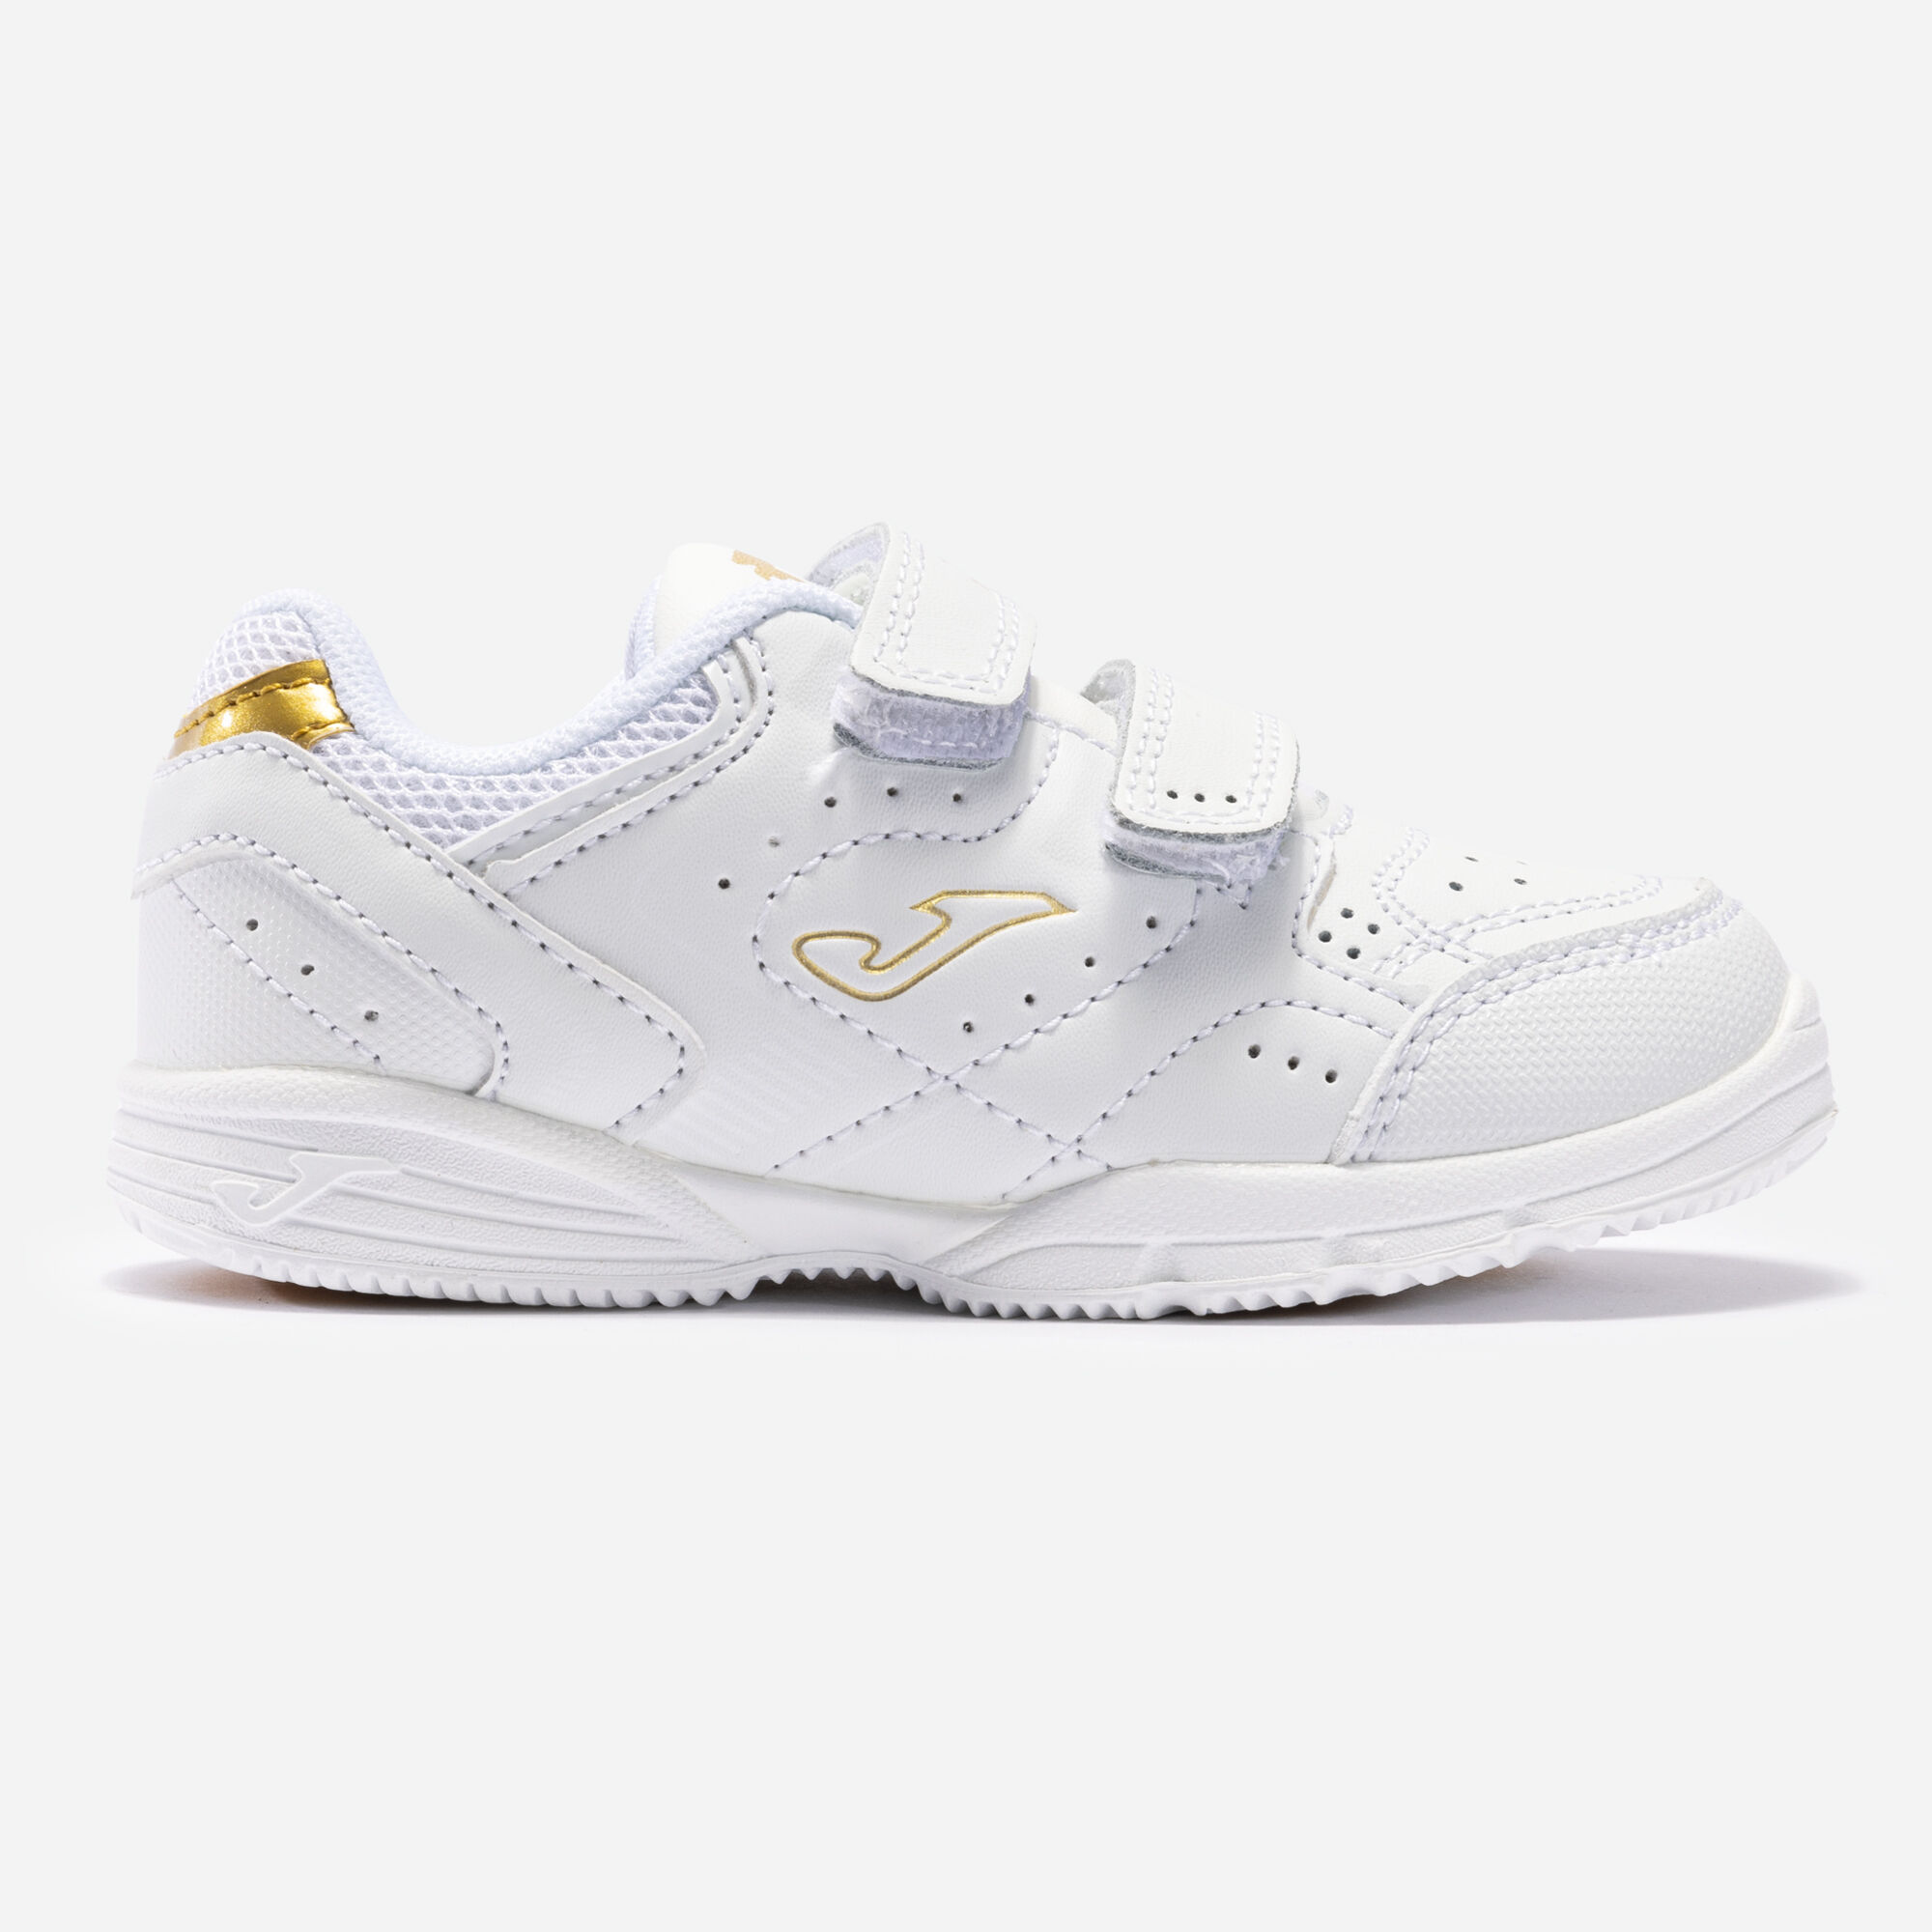 Chaussures casual School 22 junior blanc or